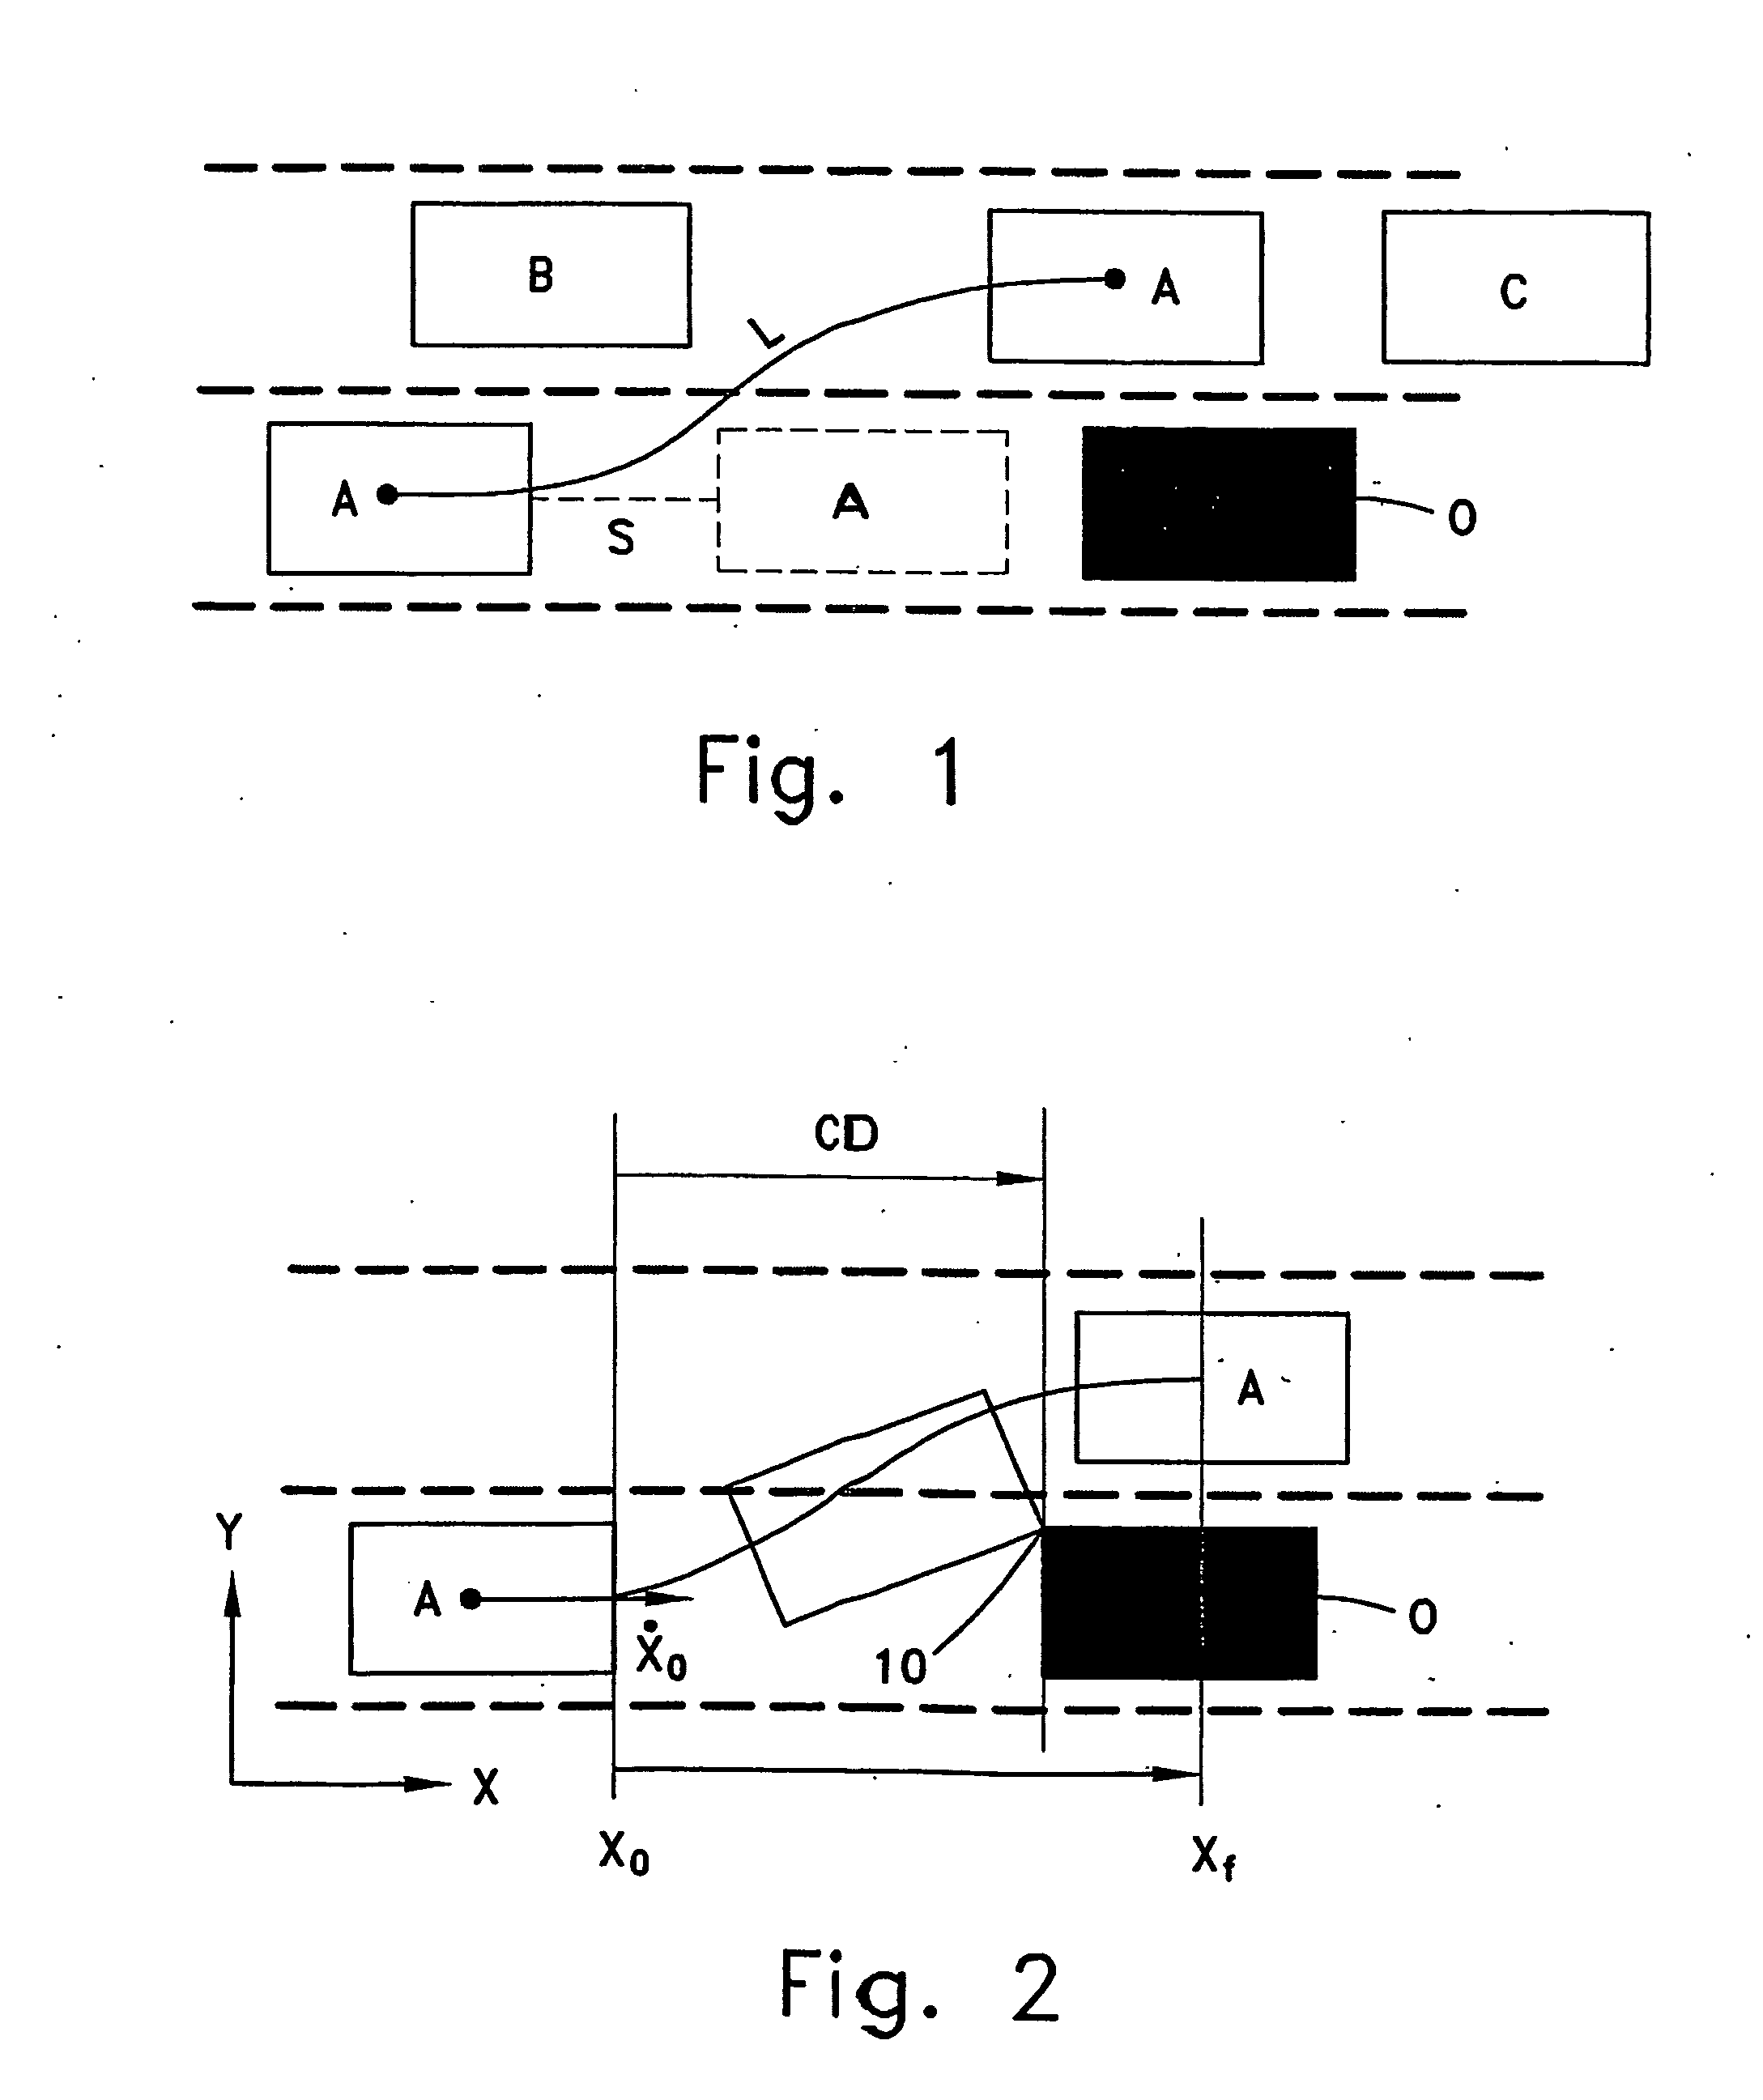 Method and system for providing warnings concerning an imminent vehicular collision